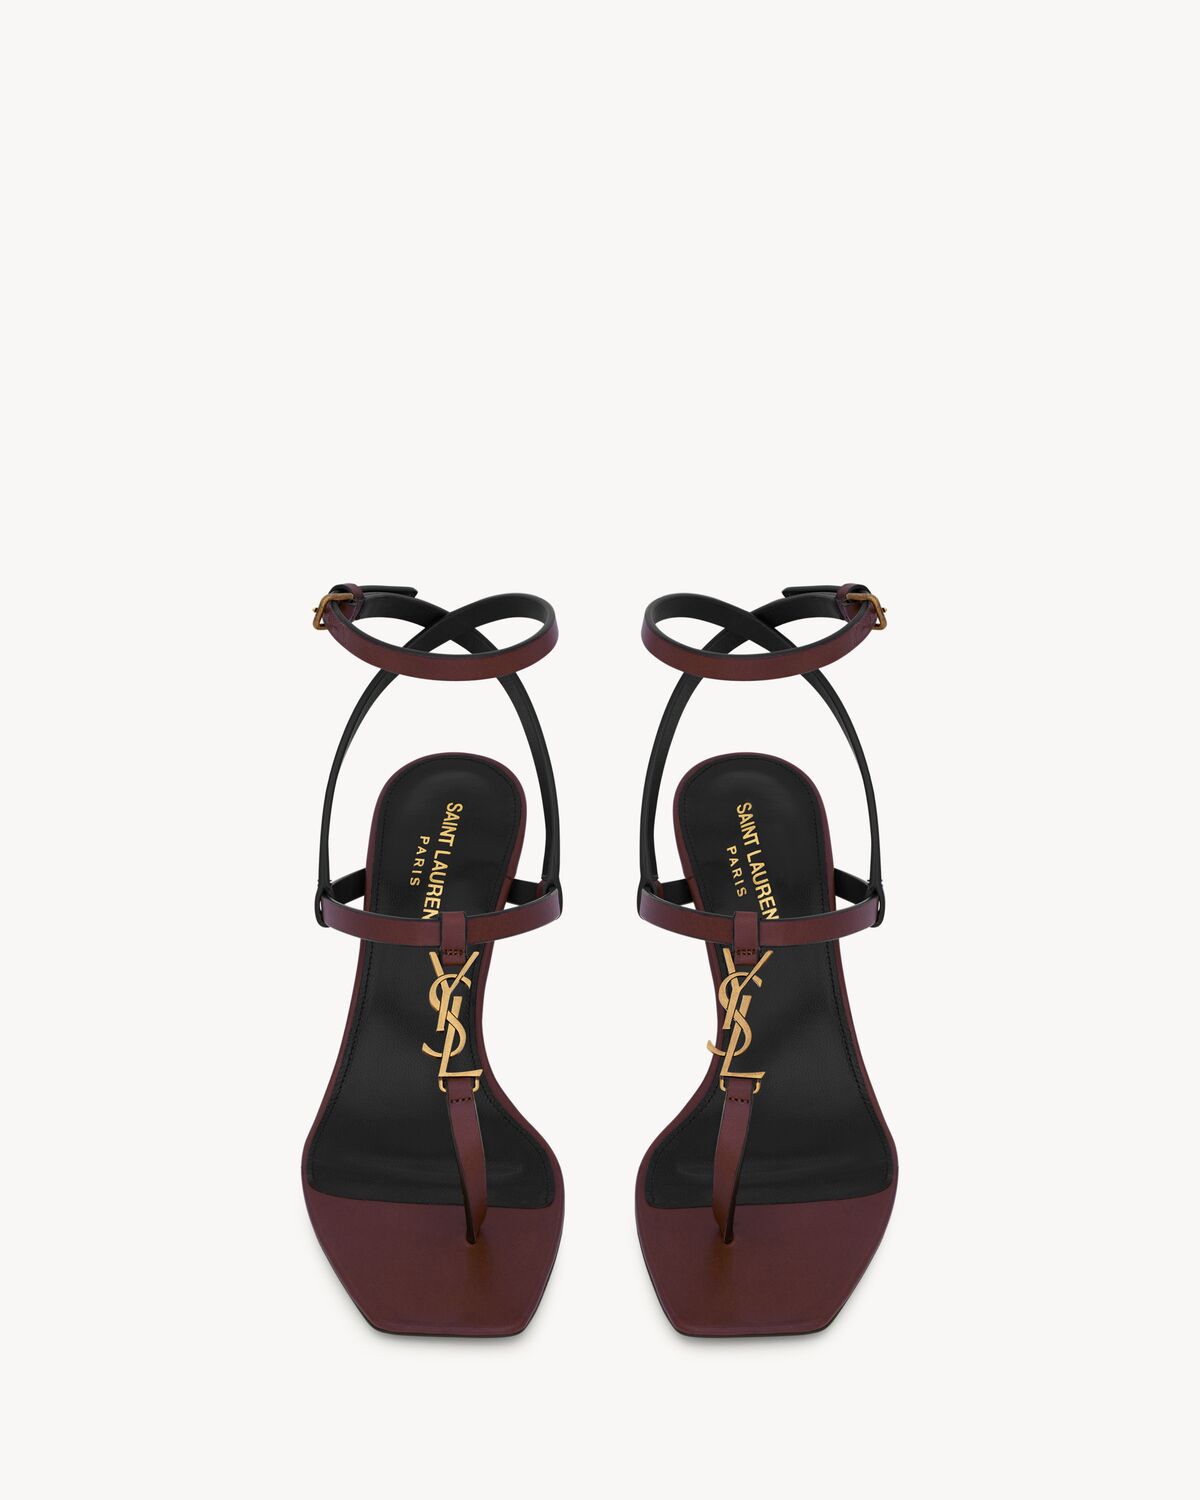 CASSANDRA sandals in smooth leather